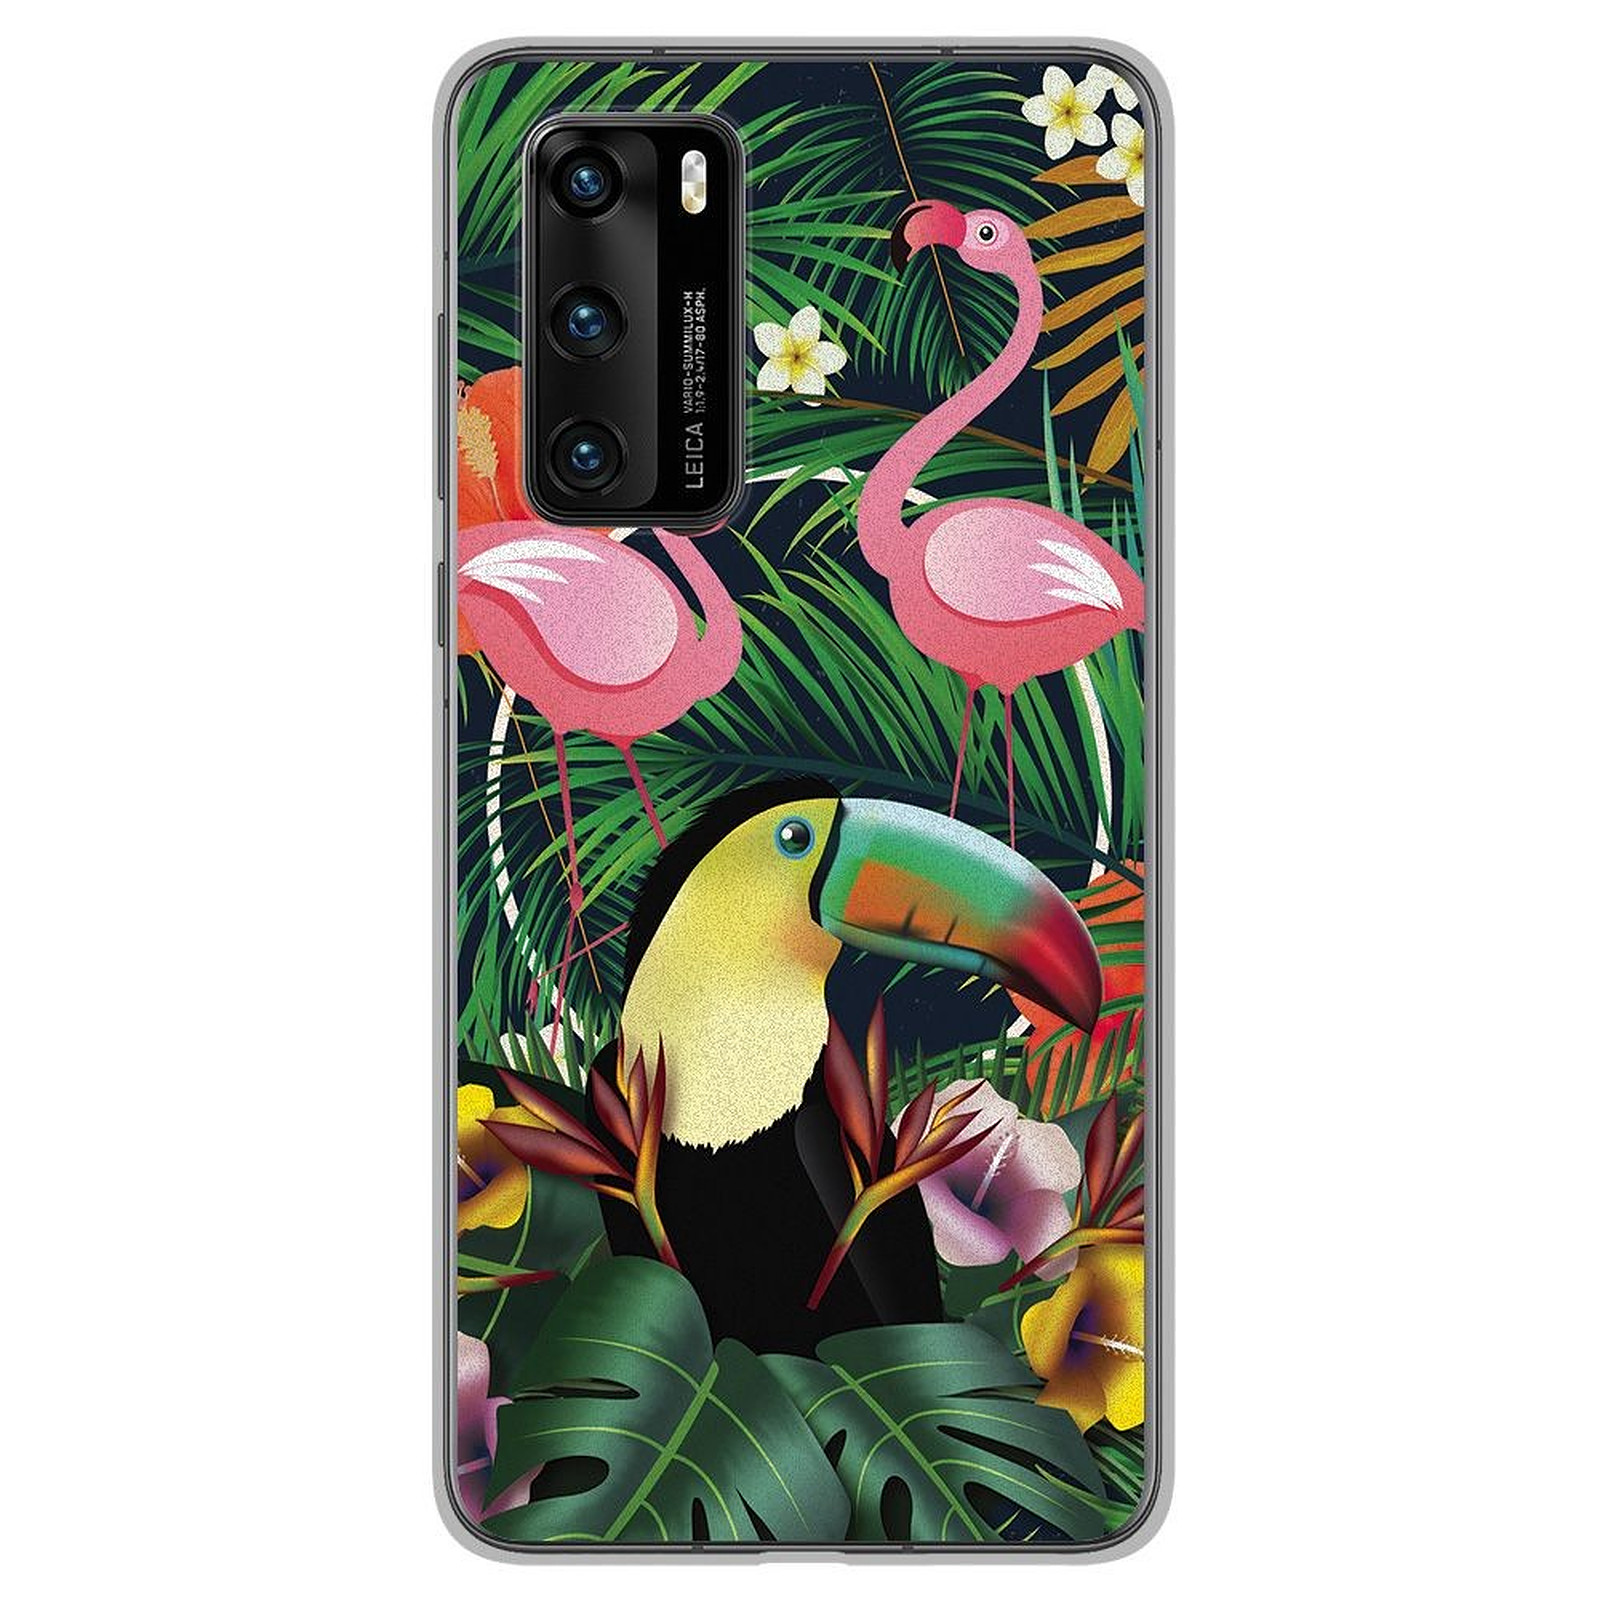 1001 Coques Coque silicone gel Huawei P40 motif Tropical Toucan - Coque telephone 1001Coques